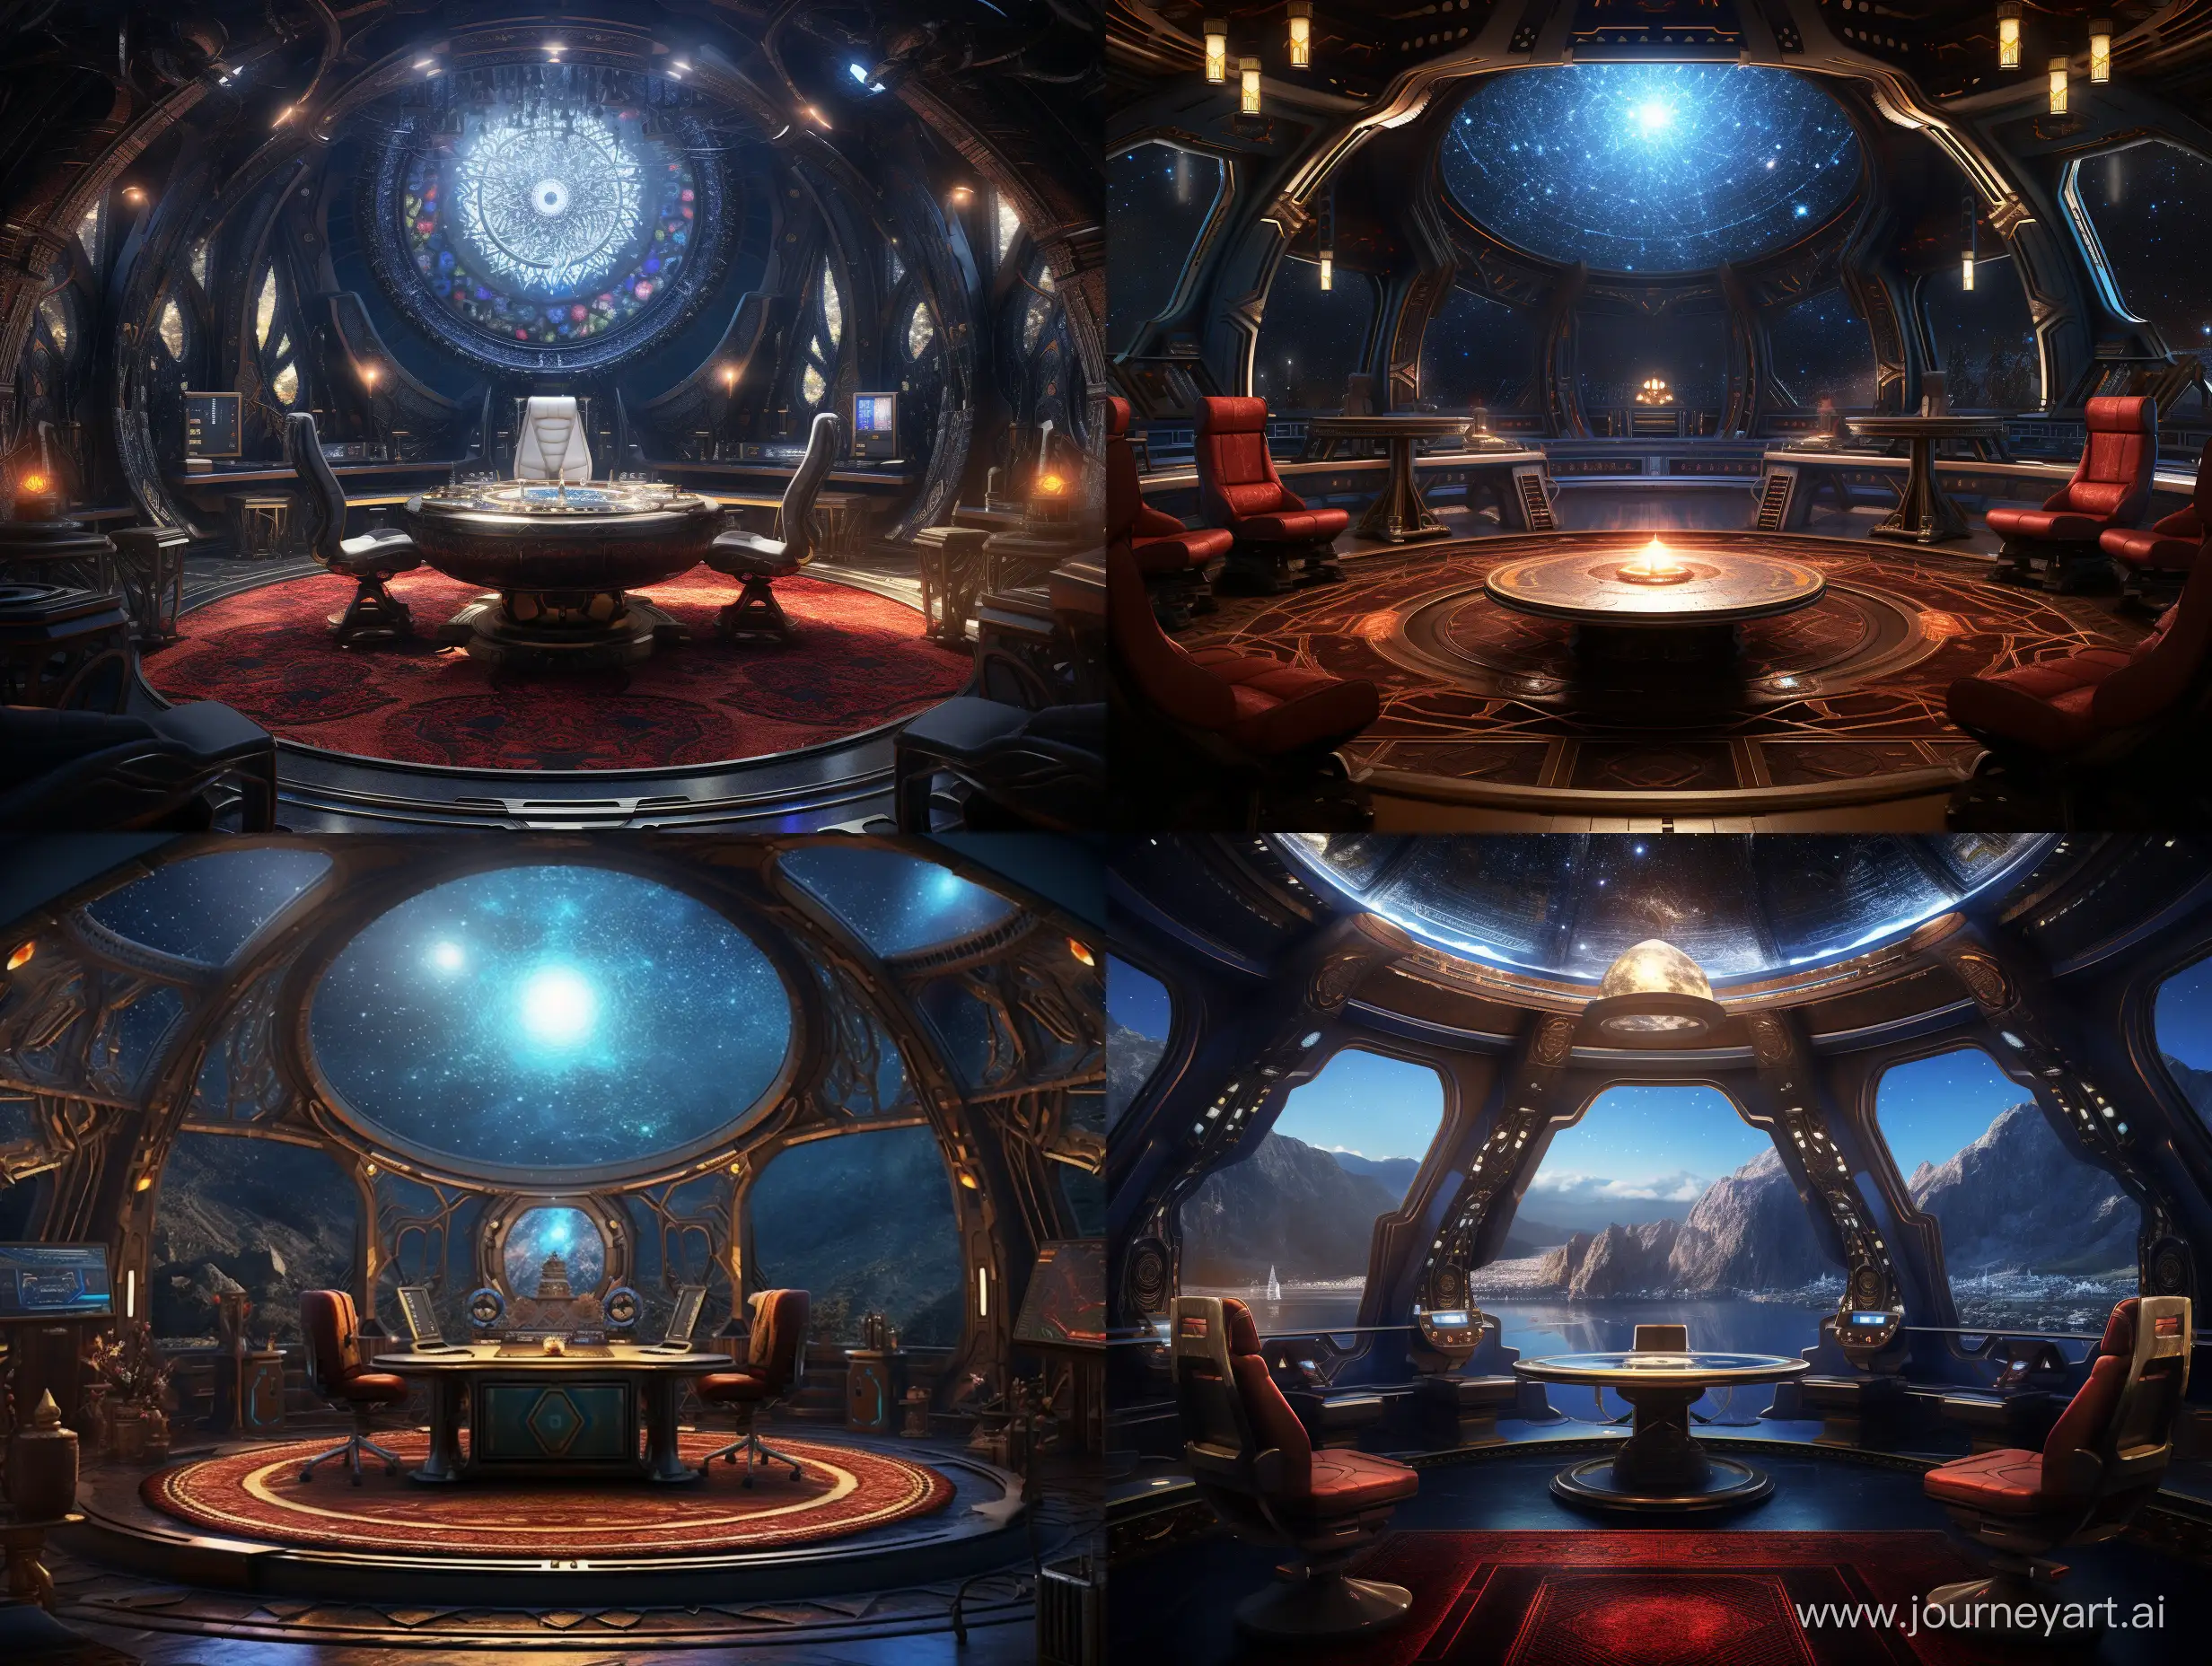 command room of a unique space battleship, traditional turkish style texture, elegant interior design, a traditional turkish carpet on the groud, v shaped construction, all machines use light instead of electricity, ship travels across stars, stars visible from windows, realistic, epic, hopeful